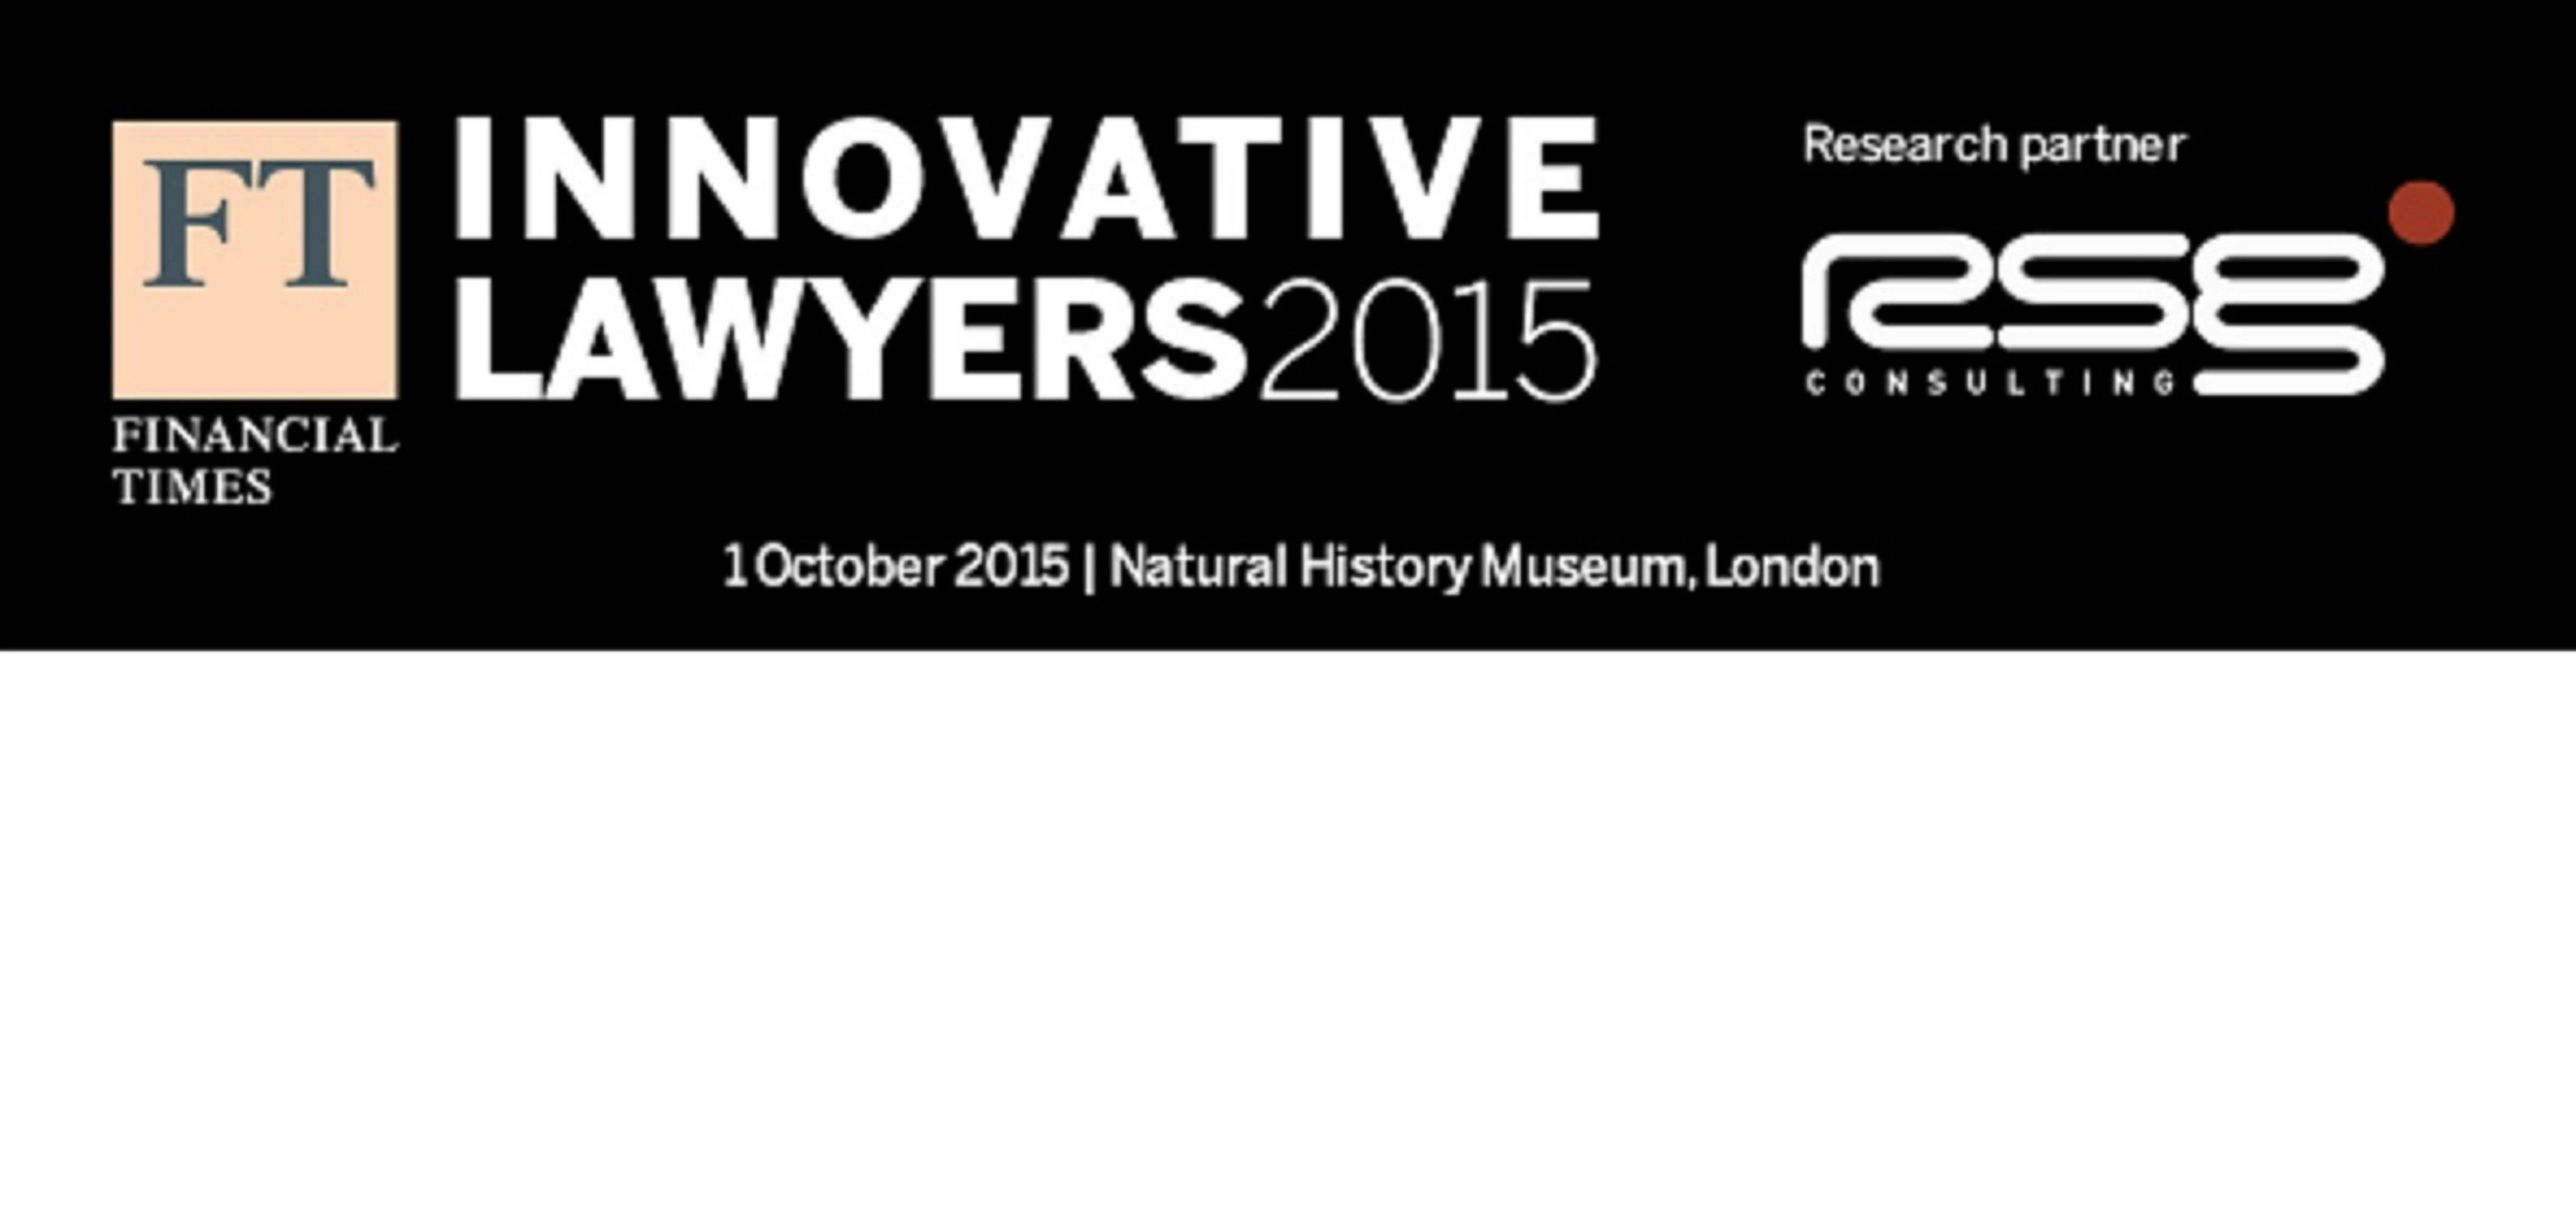 Emsleys Solicitors shortlisted in the FT Innovative Lawyers Award 2015